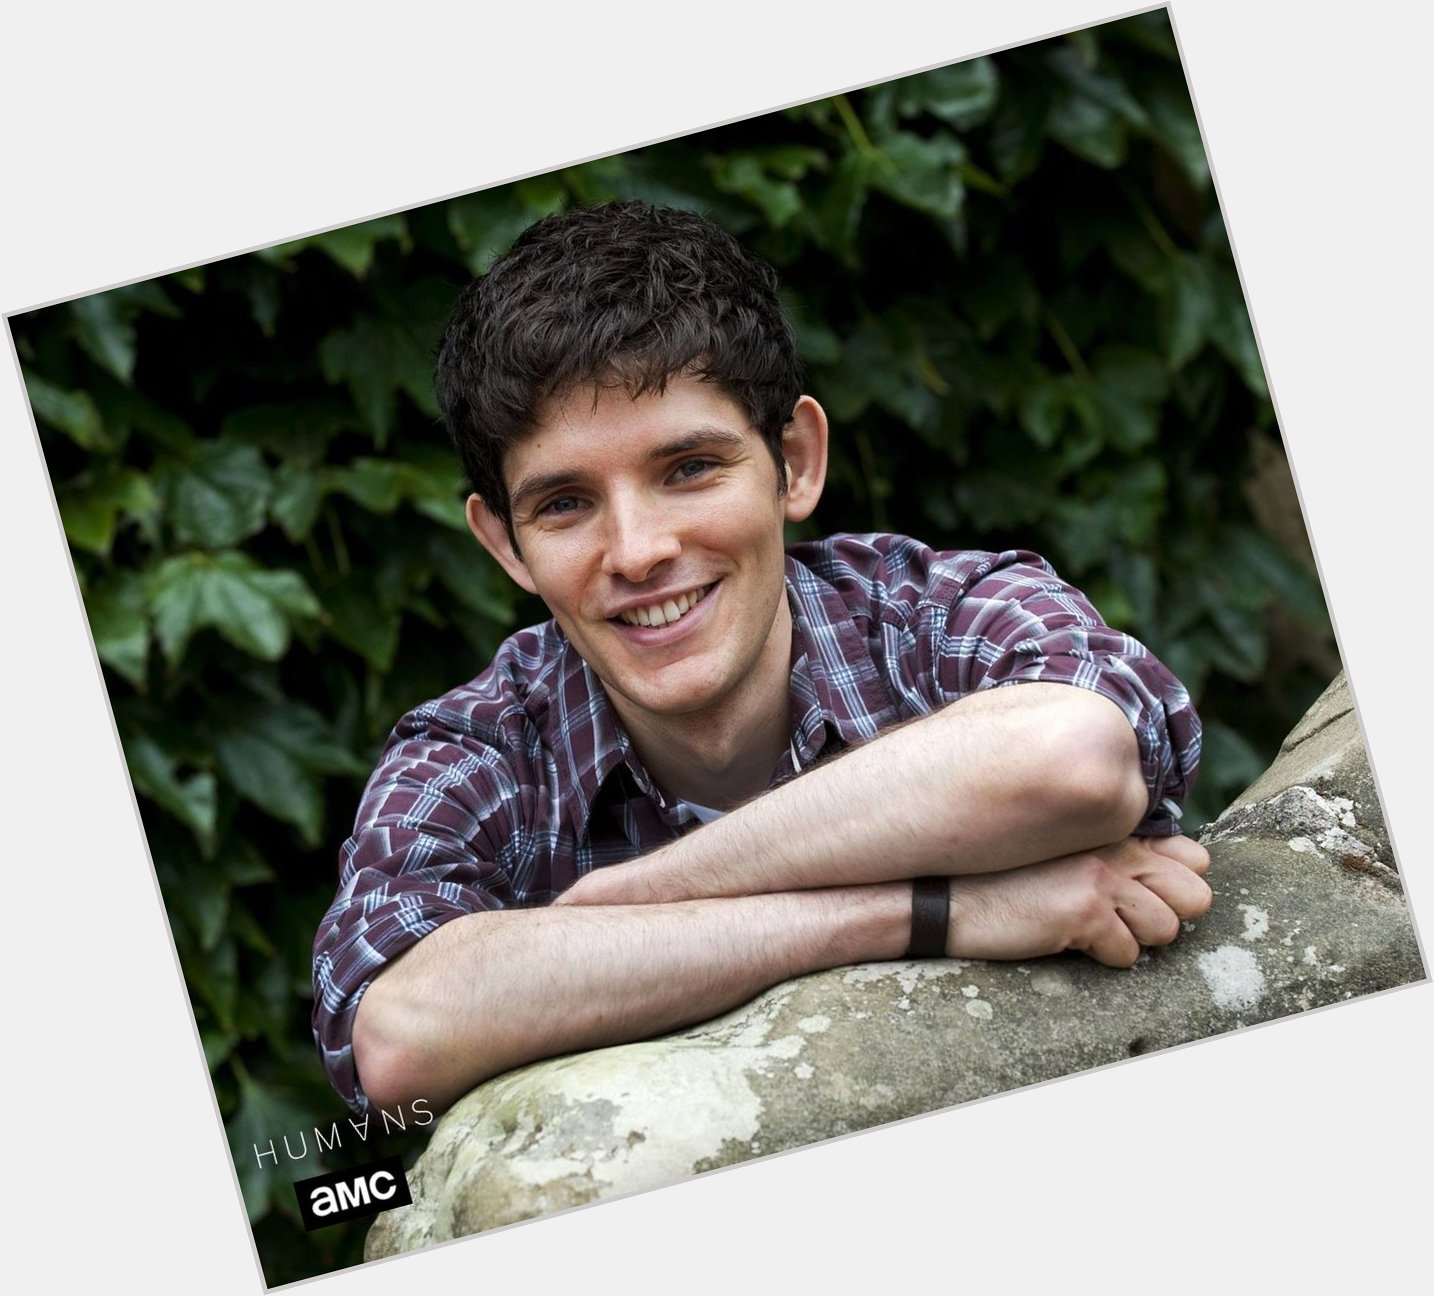 And a very happy birthday to Colin Morgan! 